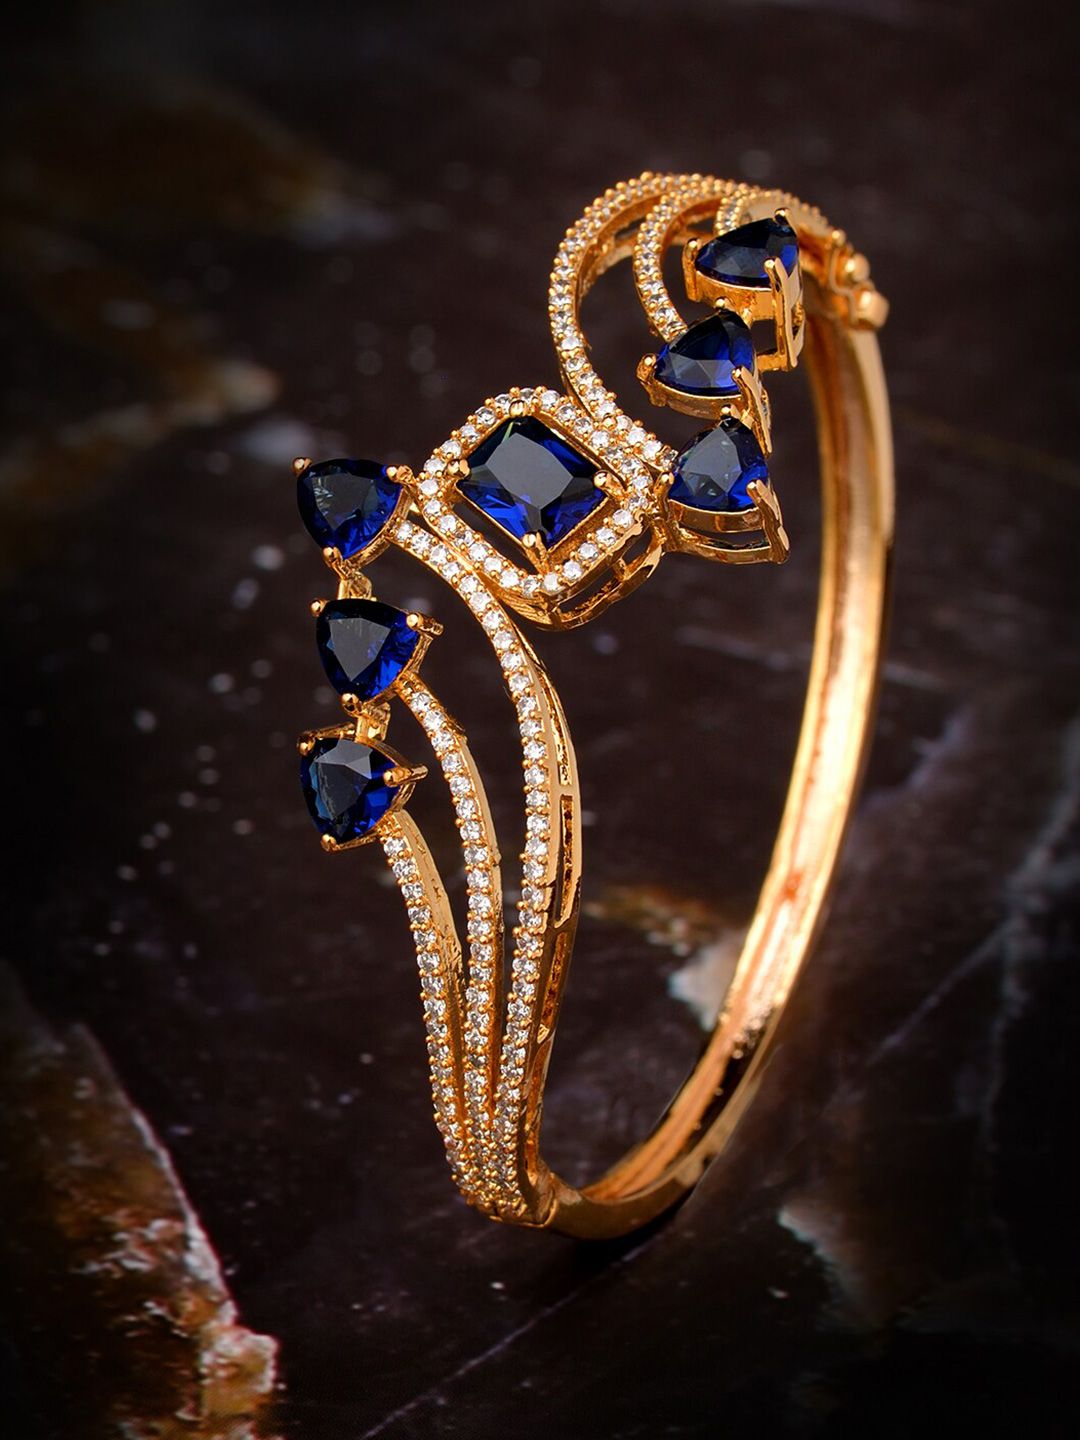 Saraf RS Jewellery Gold-Plated & Blue Handcrafted Bangle-Style Bracelet Price in India